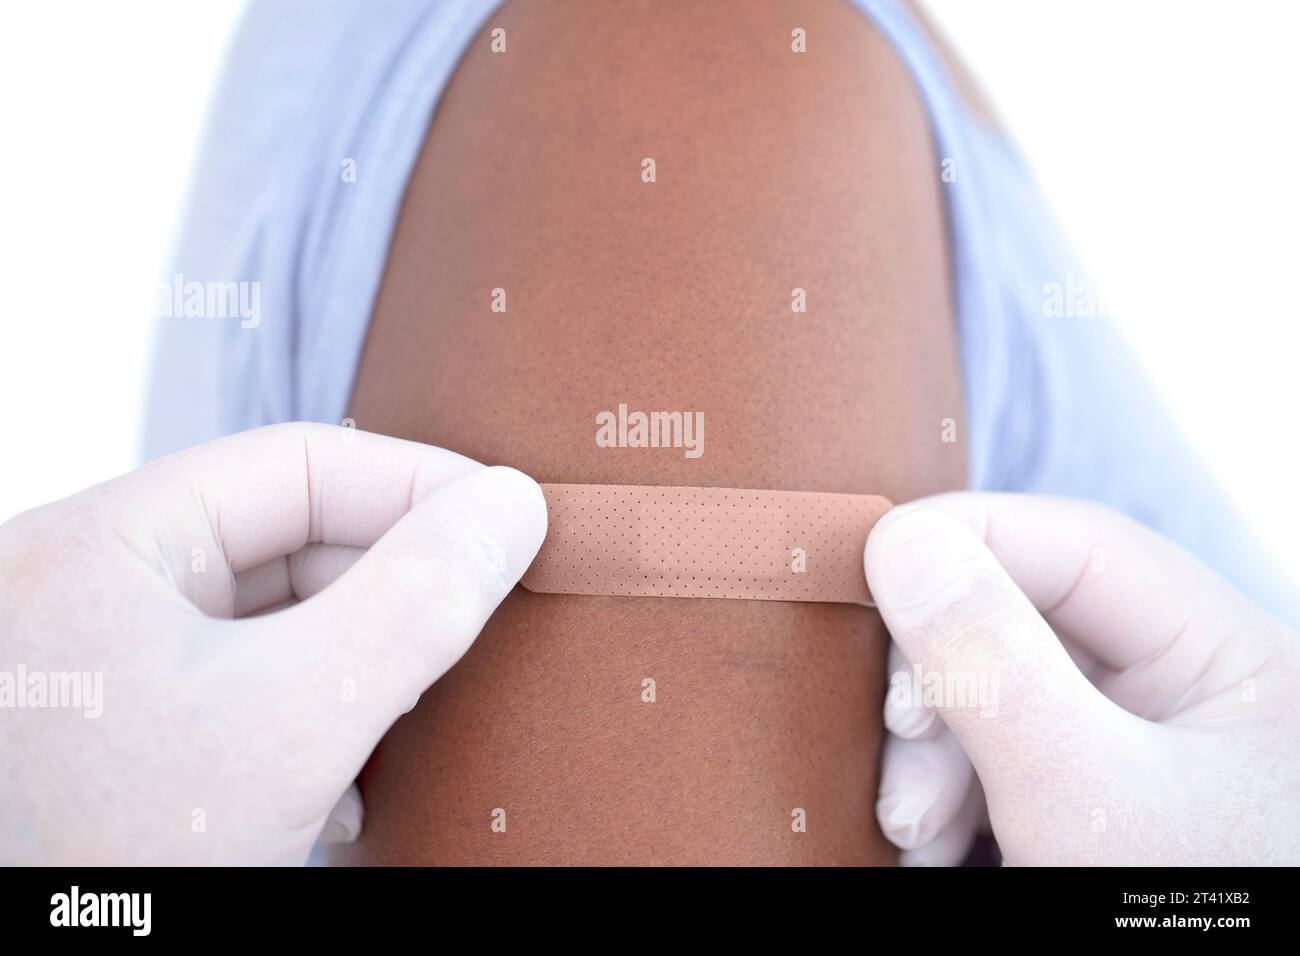 Plaster being applied to woman's arm Stock Photo